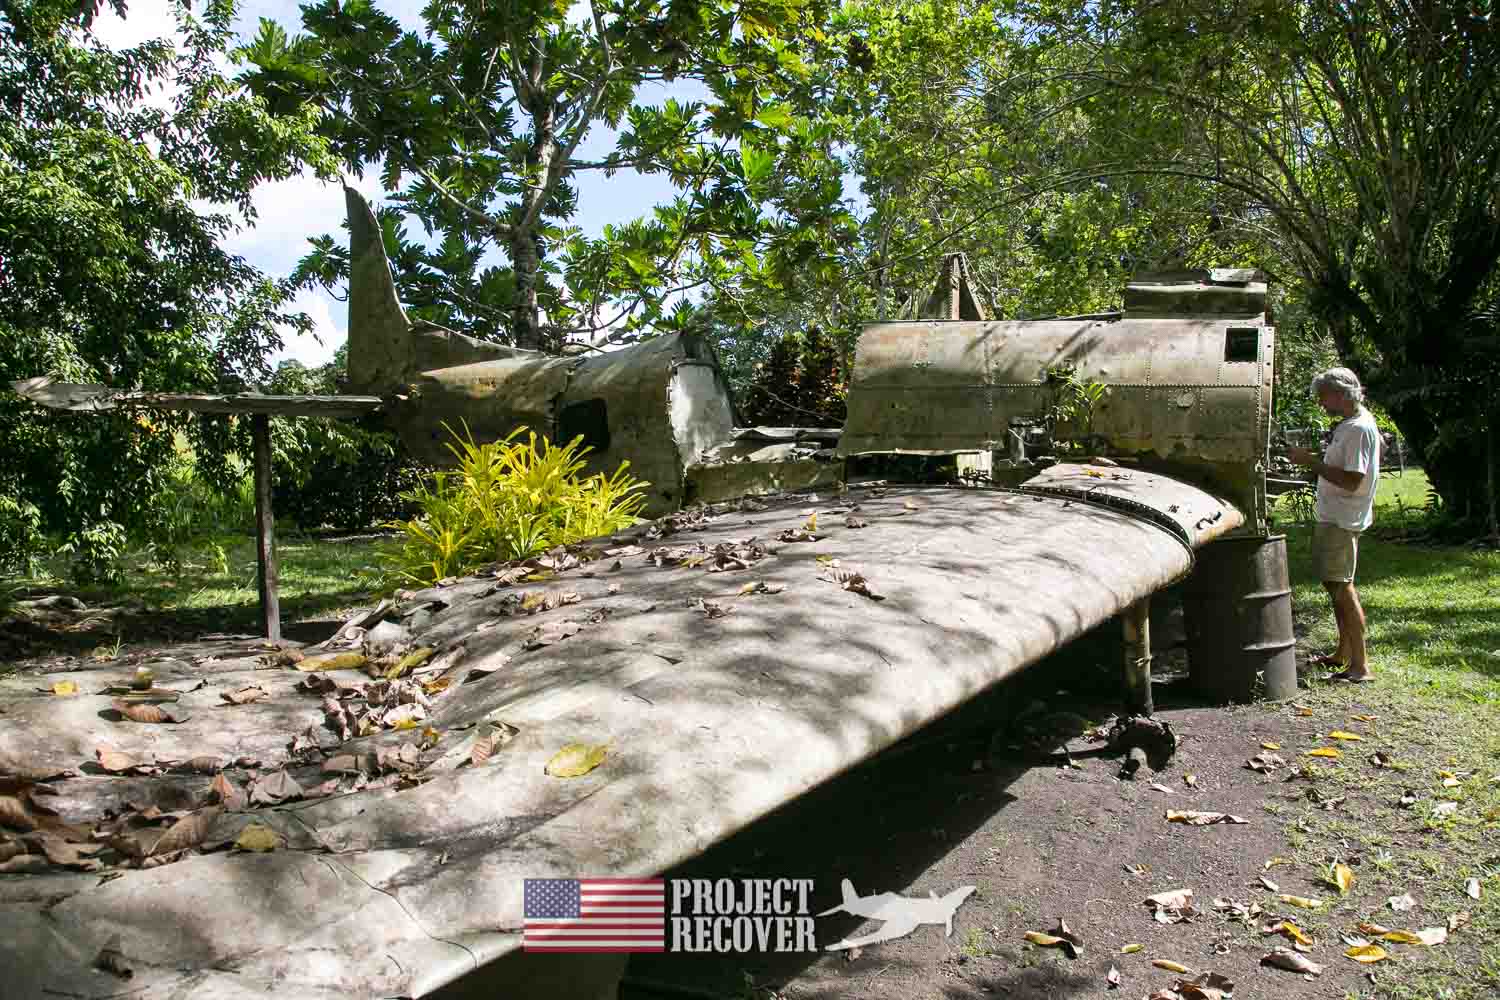 WWII airplane wreck- Vilu War Museum - Honiara - Nose gunners view Japanese WWII bomber - Vilu War Museum - Honiara - while looking to find Solomon Islands MIAs - Project Recover and BentProp Project are committed to bringing the MIA home. Photos by Harry Parker Photography.com